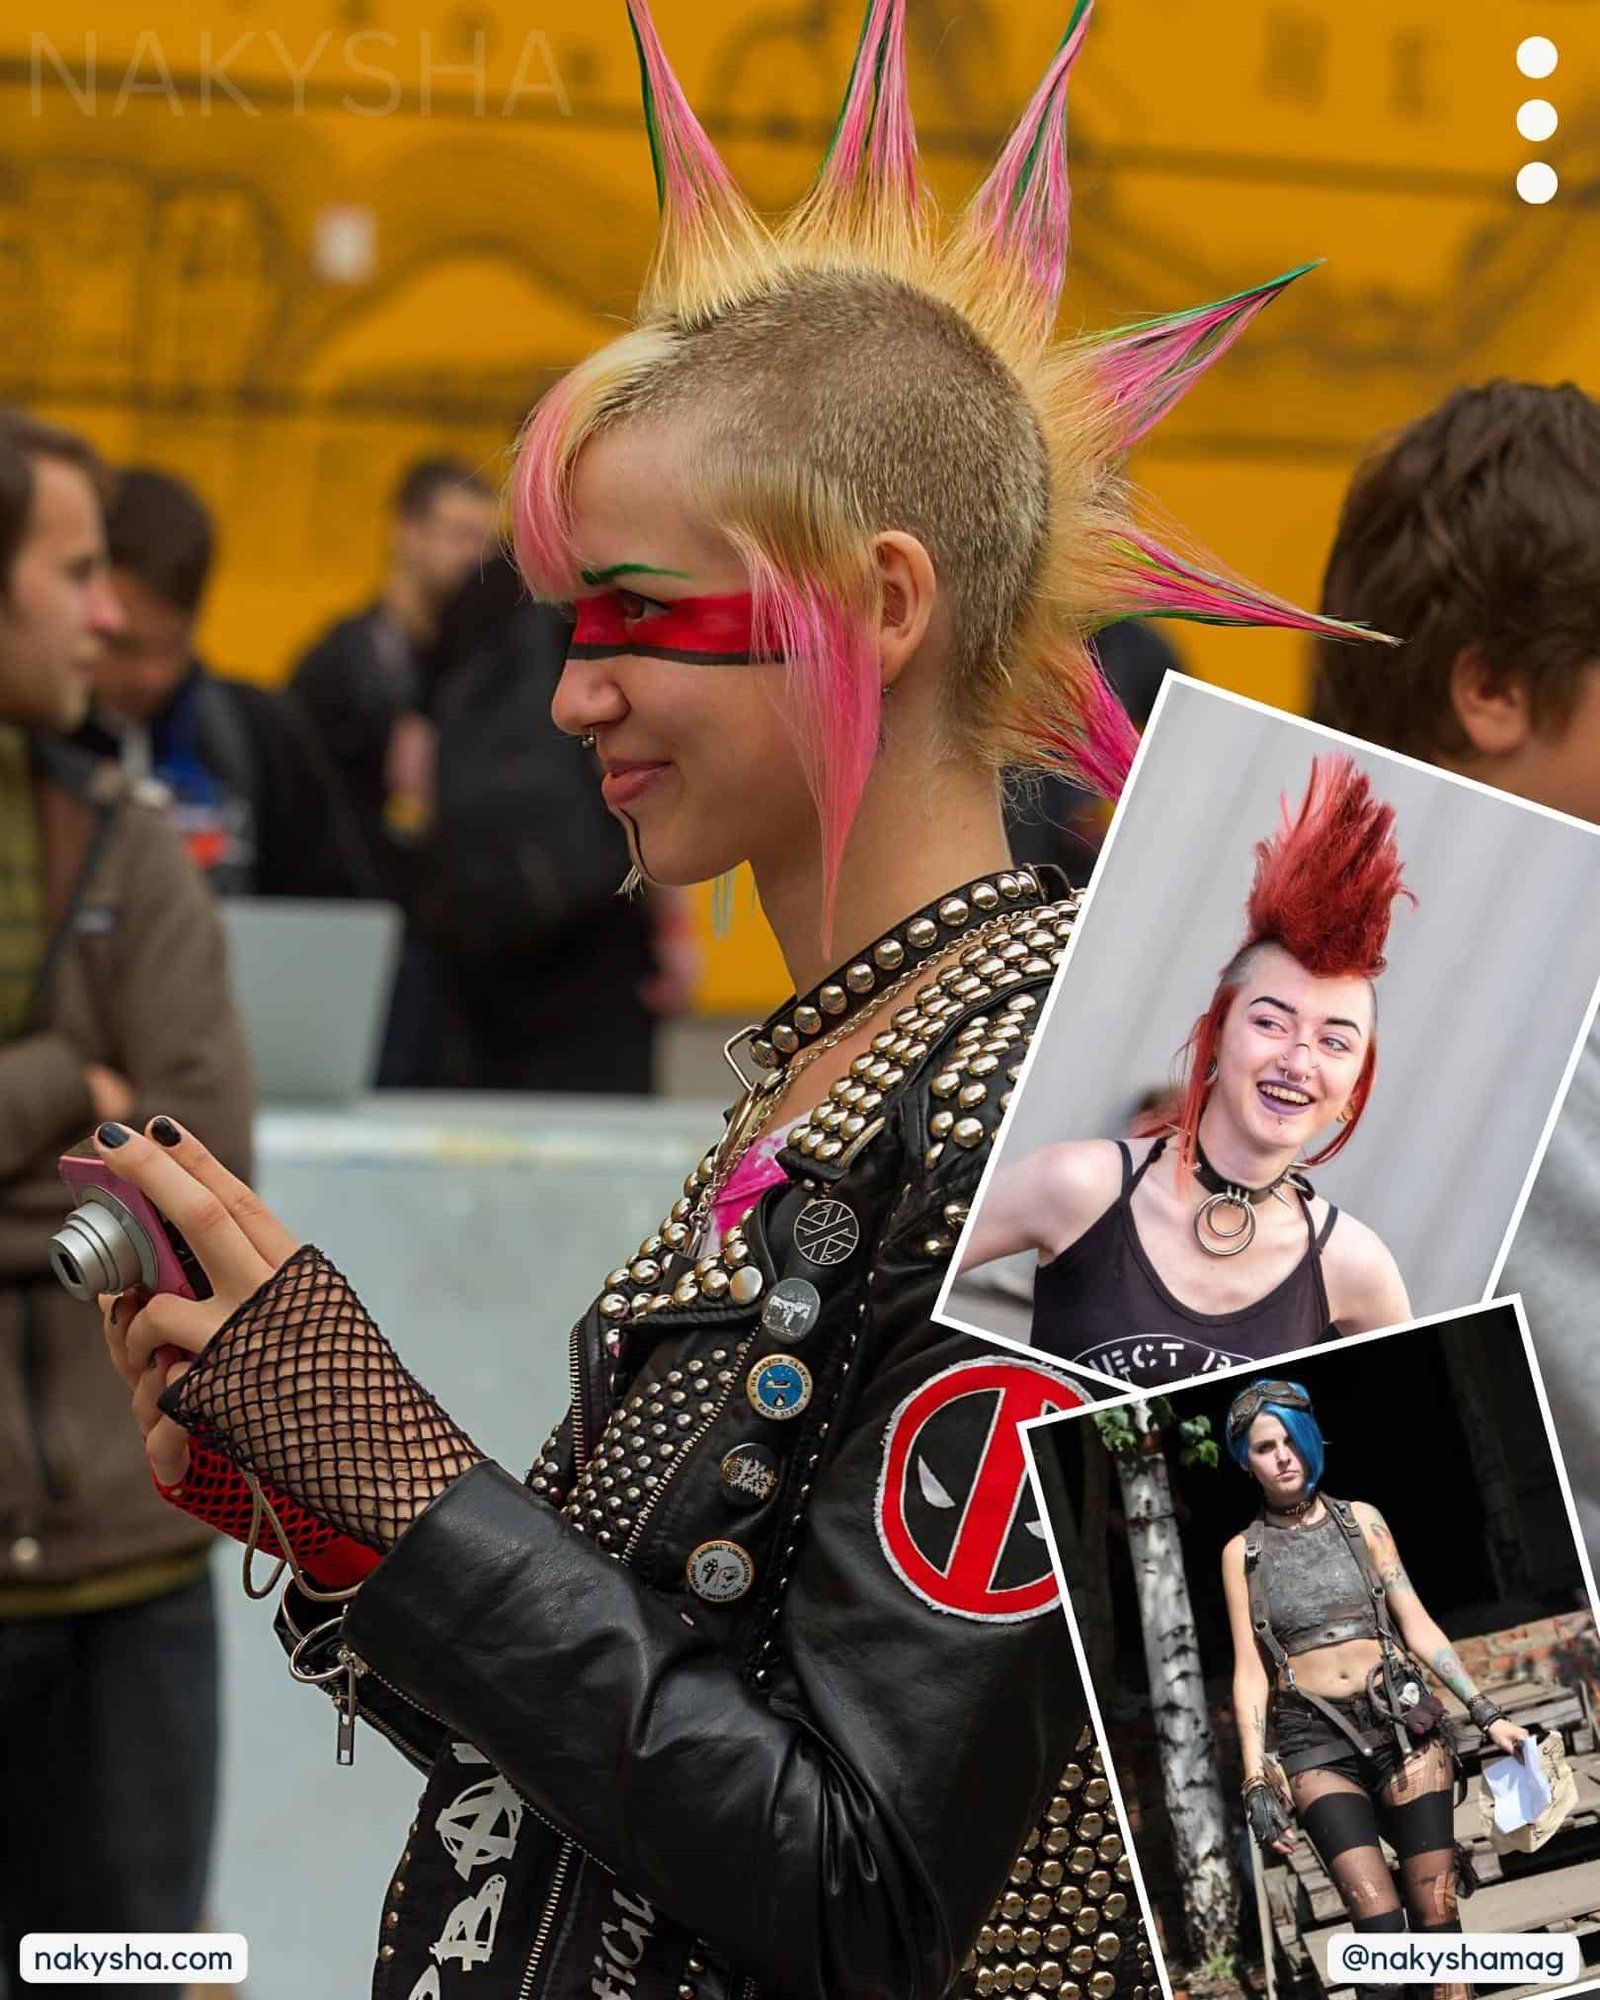 5 Punk Fashion Pieces to Try - Crossroads